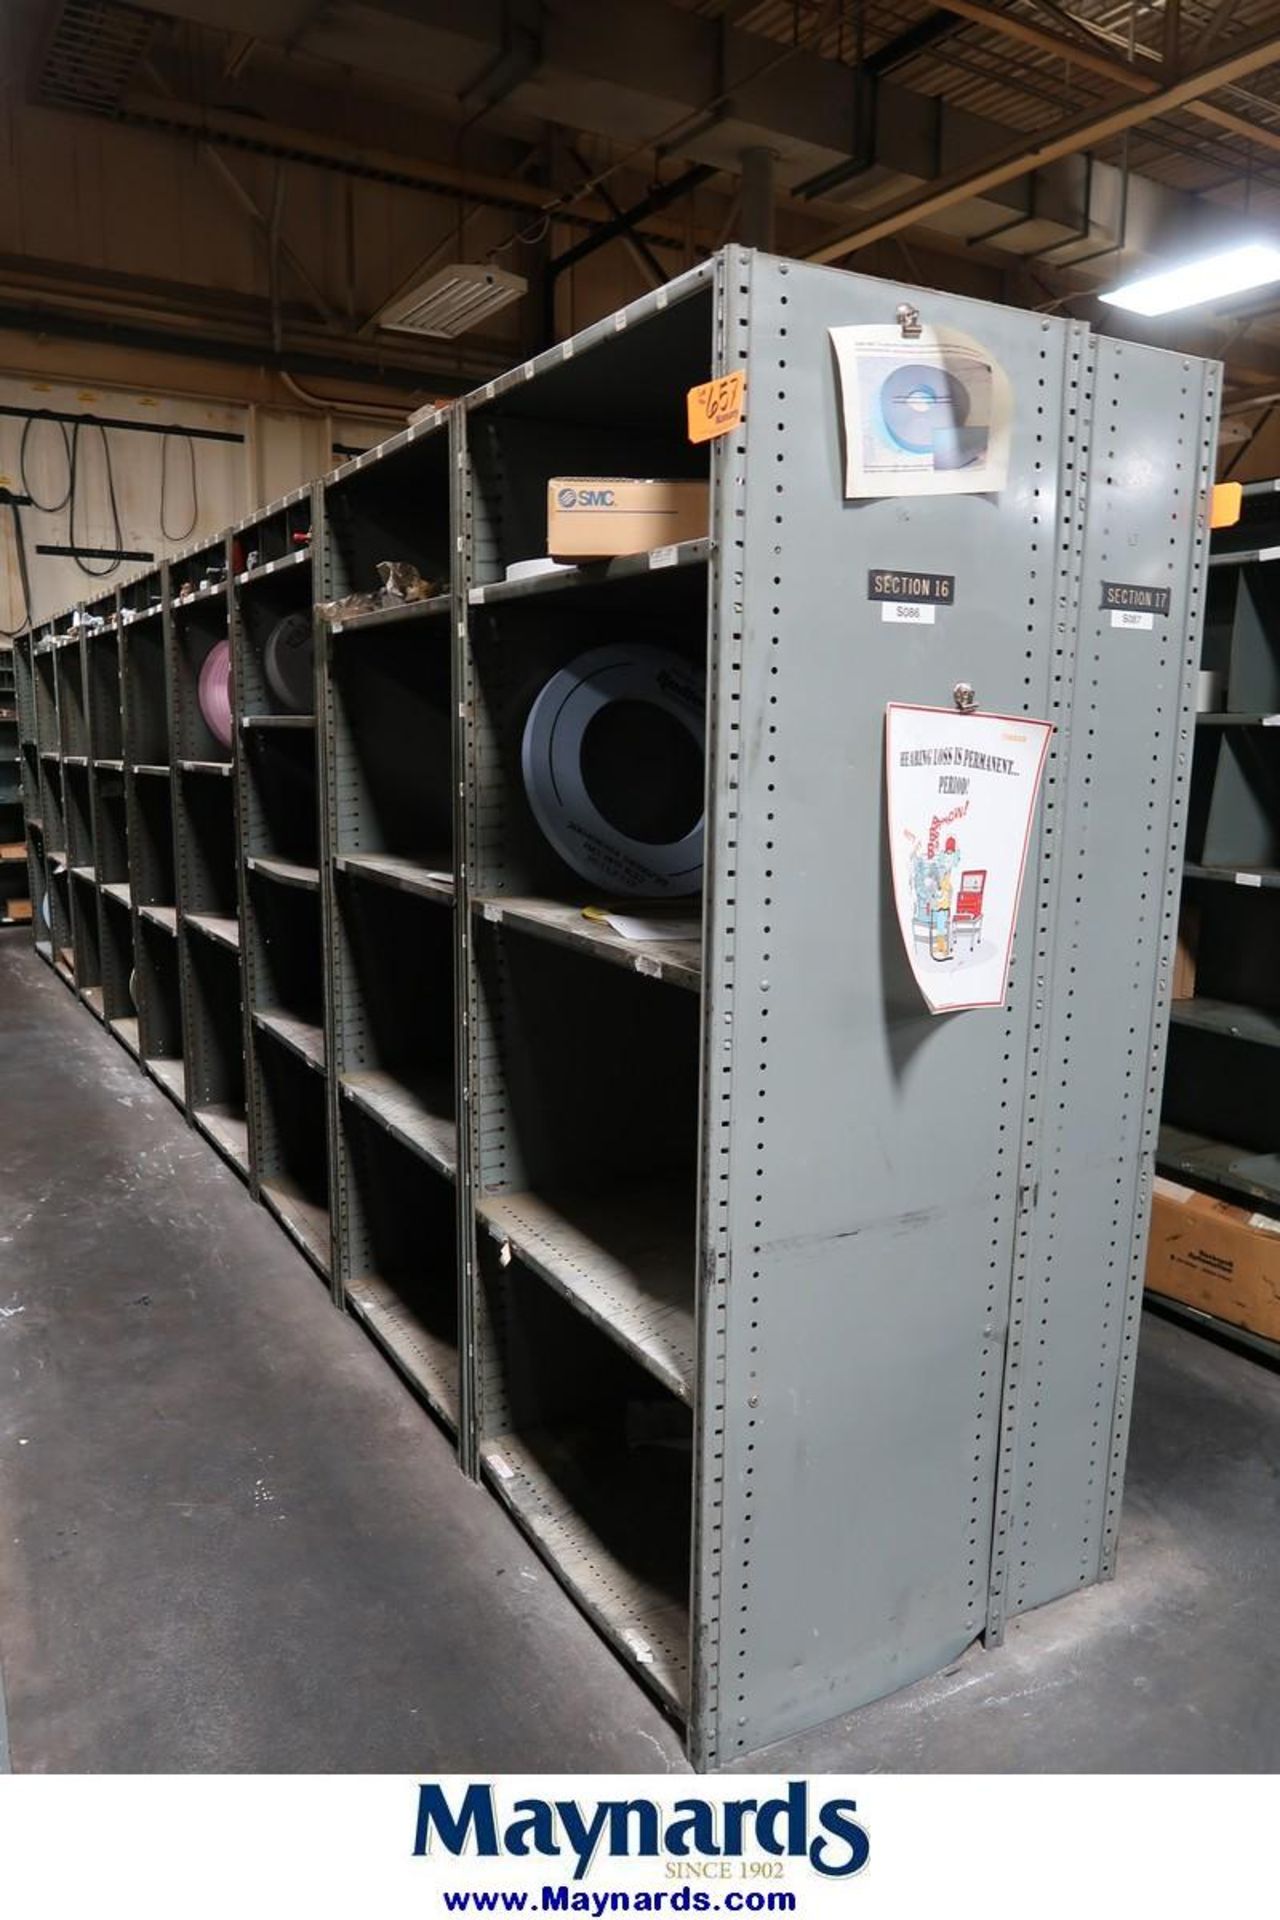 Adjustable Shelving Units with Contents of Spare Parts